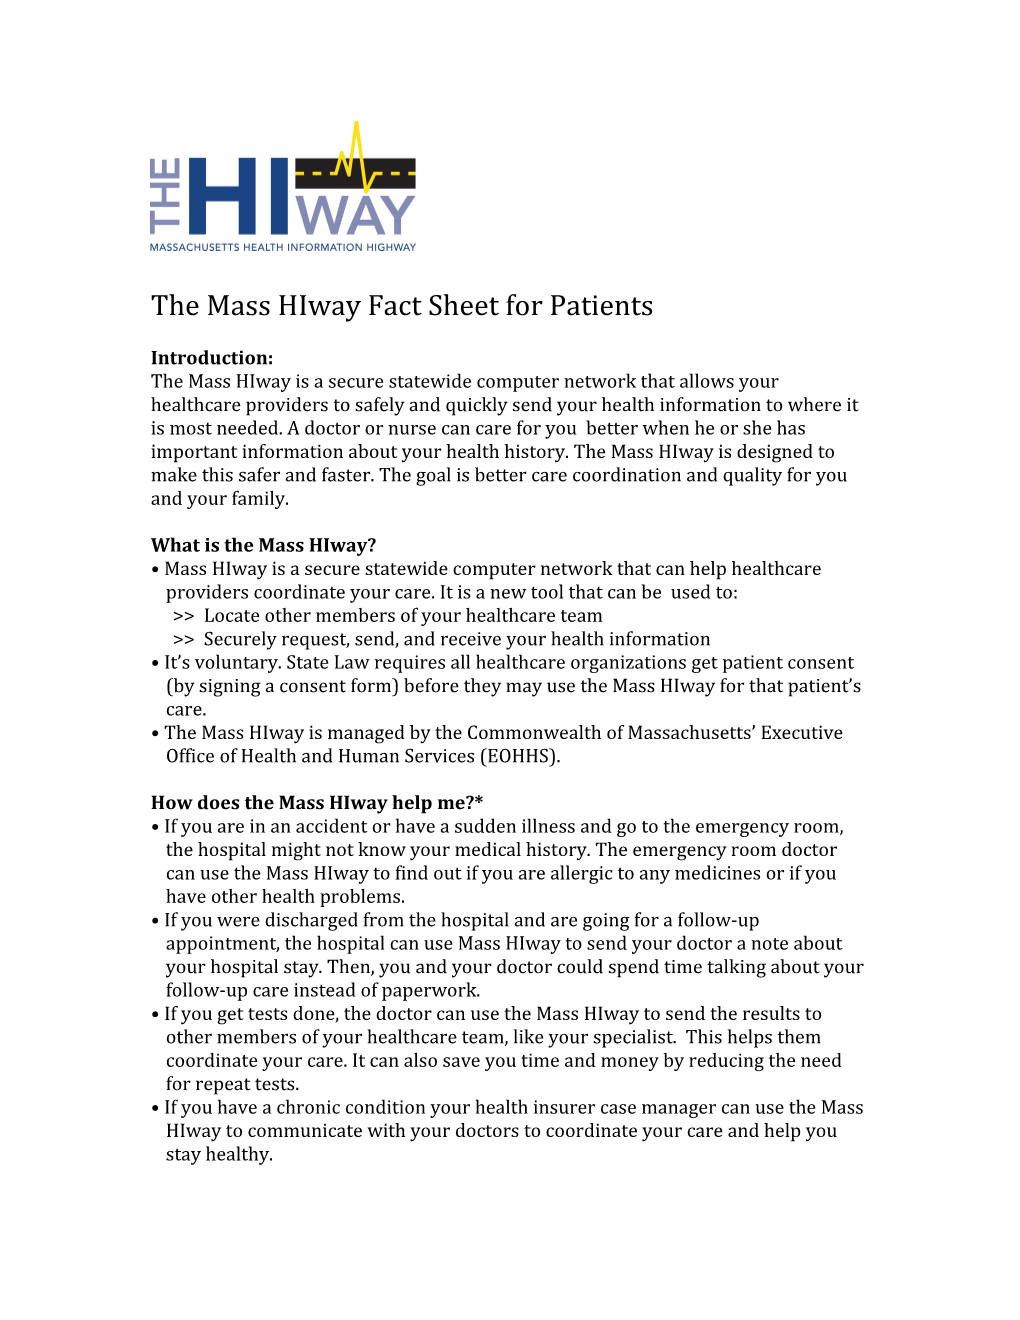 What Is the Mass Hiway?